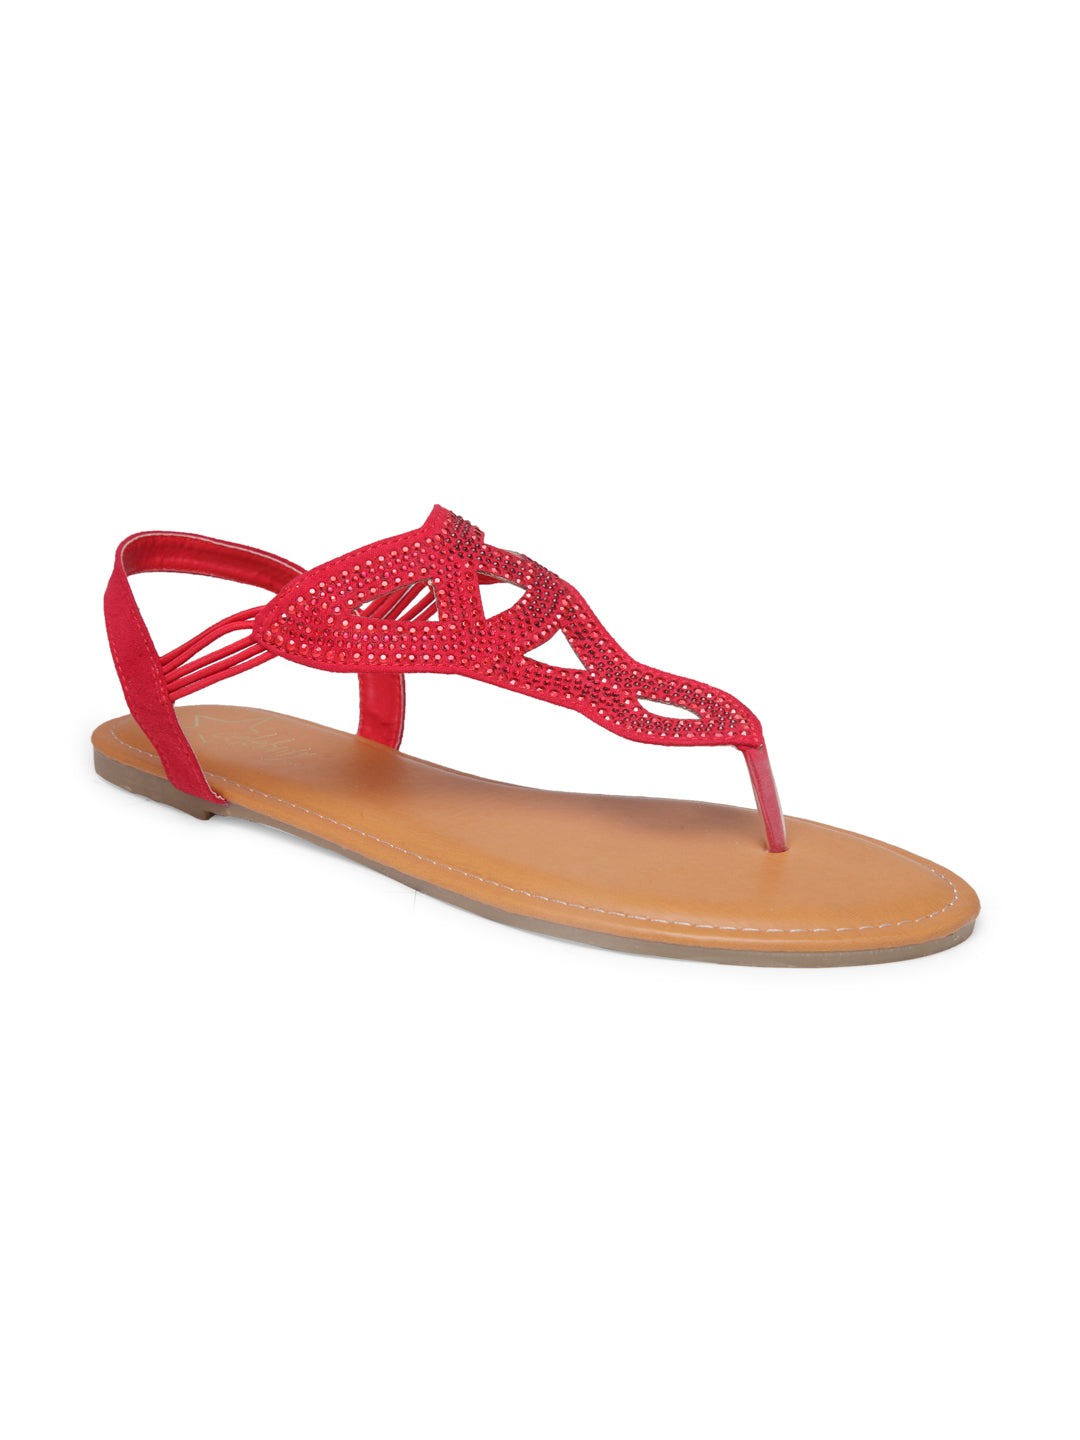 Red Flat Sandals - Red